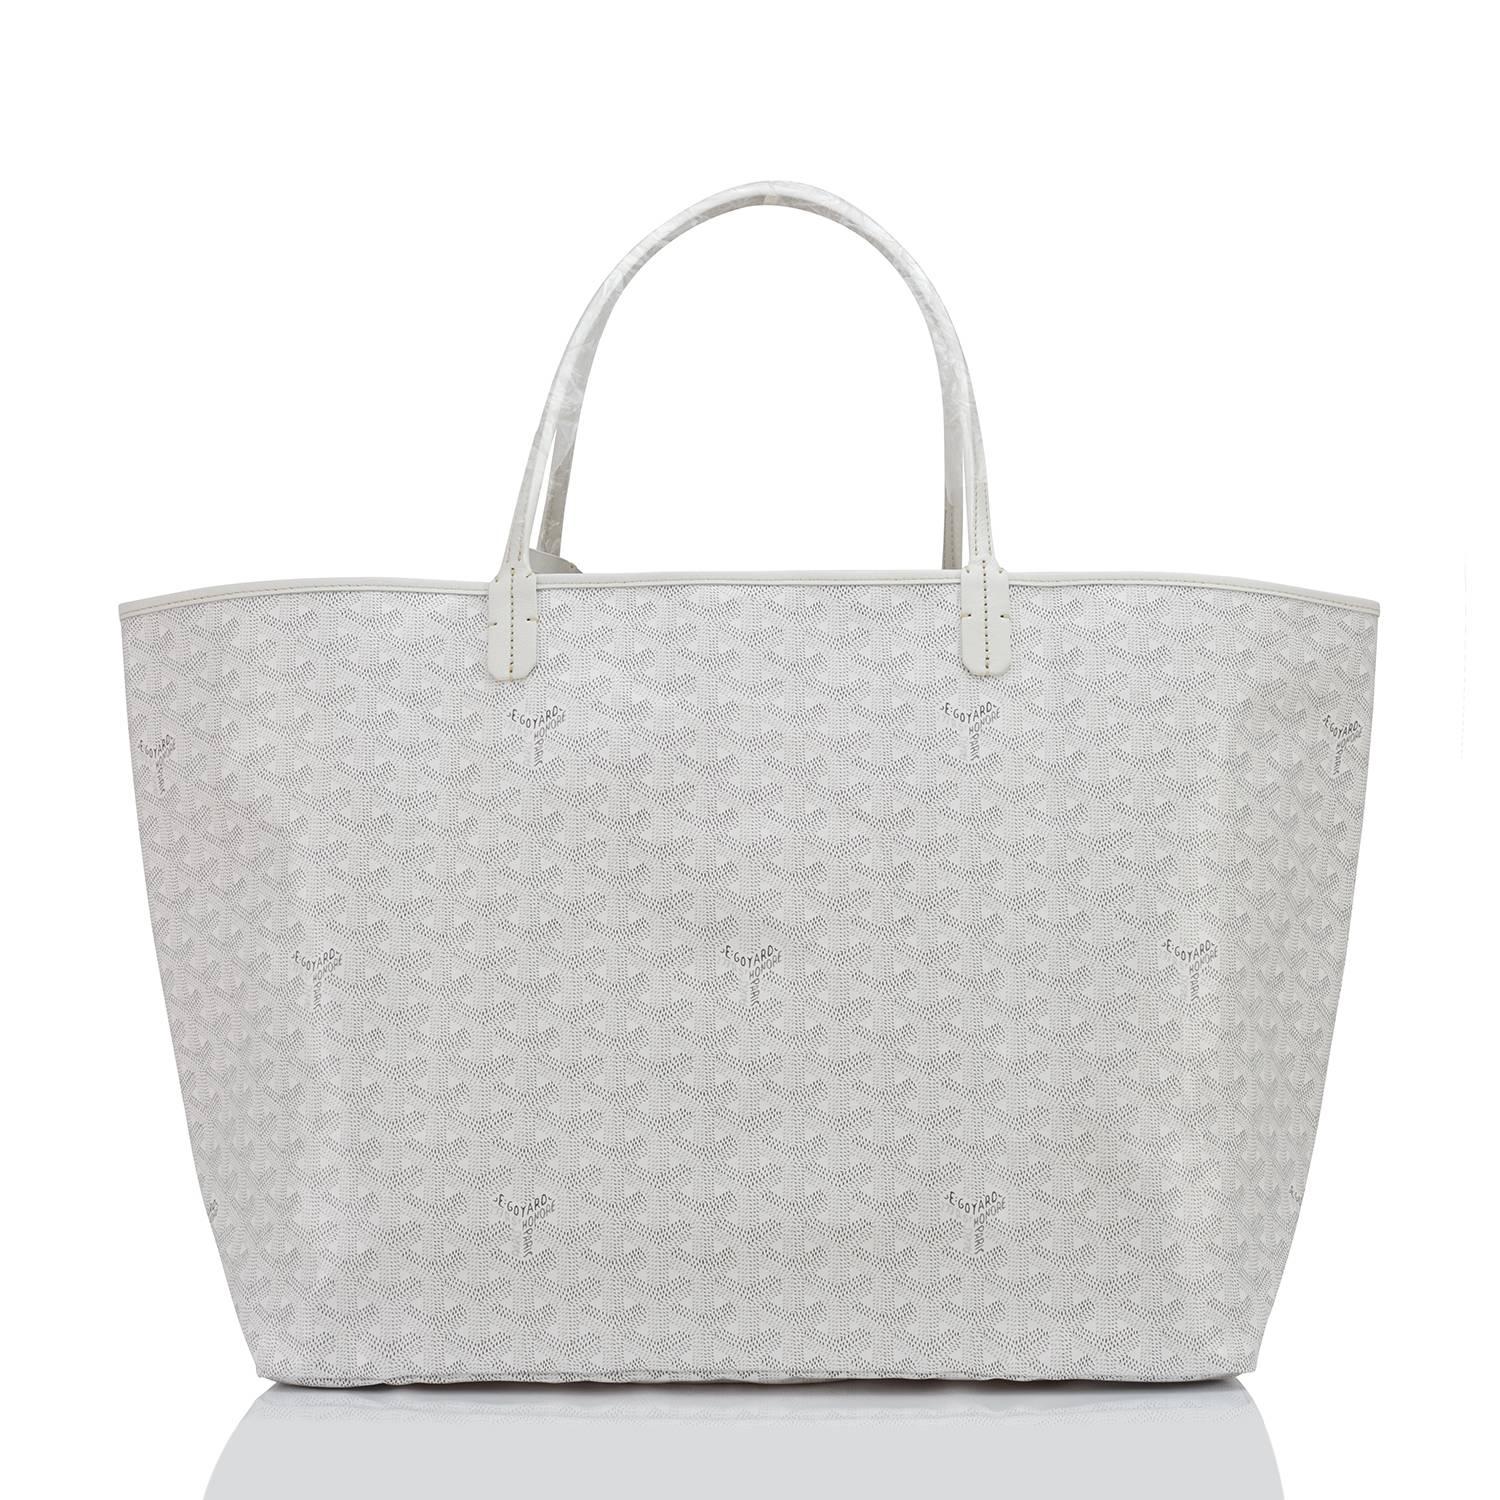 Goyard White St Louis GM Chevron Tote Bag Fabulous 
Brand New. Store Fresh. Pristine Condition (with plastic on handles) 
Perfect gift! Comes with yellow Goyard sleeper and inner organizational pochette. 
This is the cult-favorite Goyard Chevron